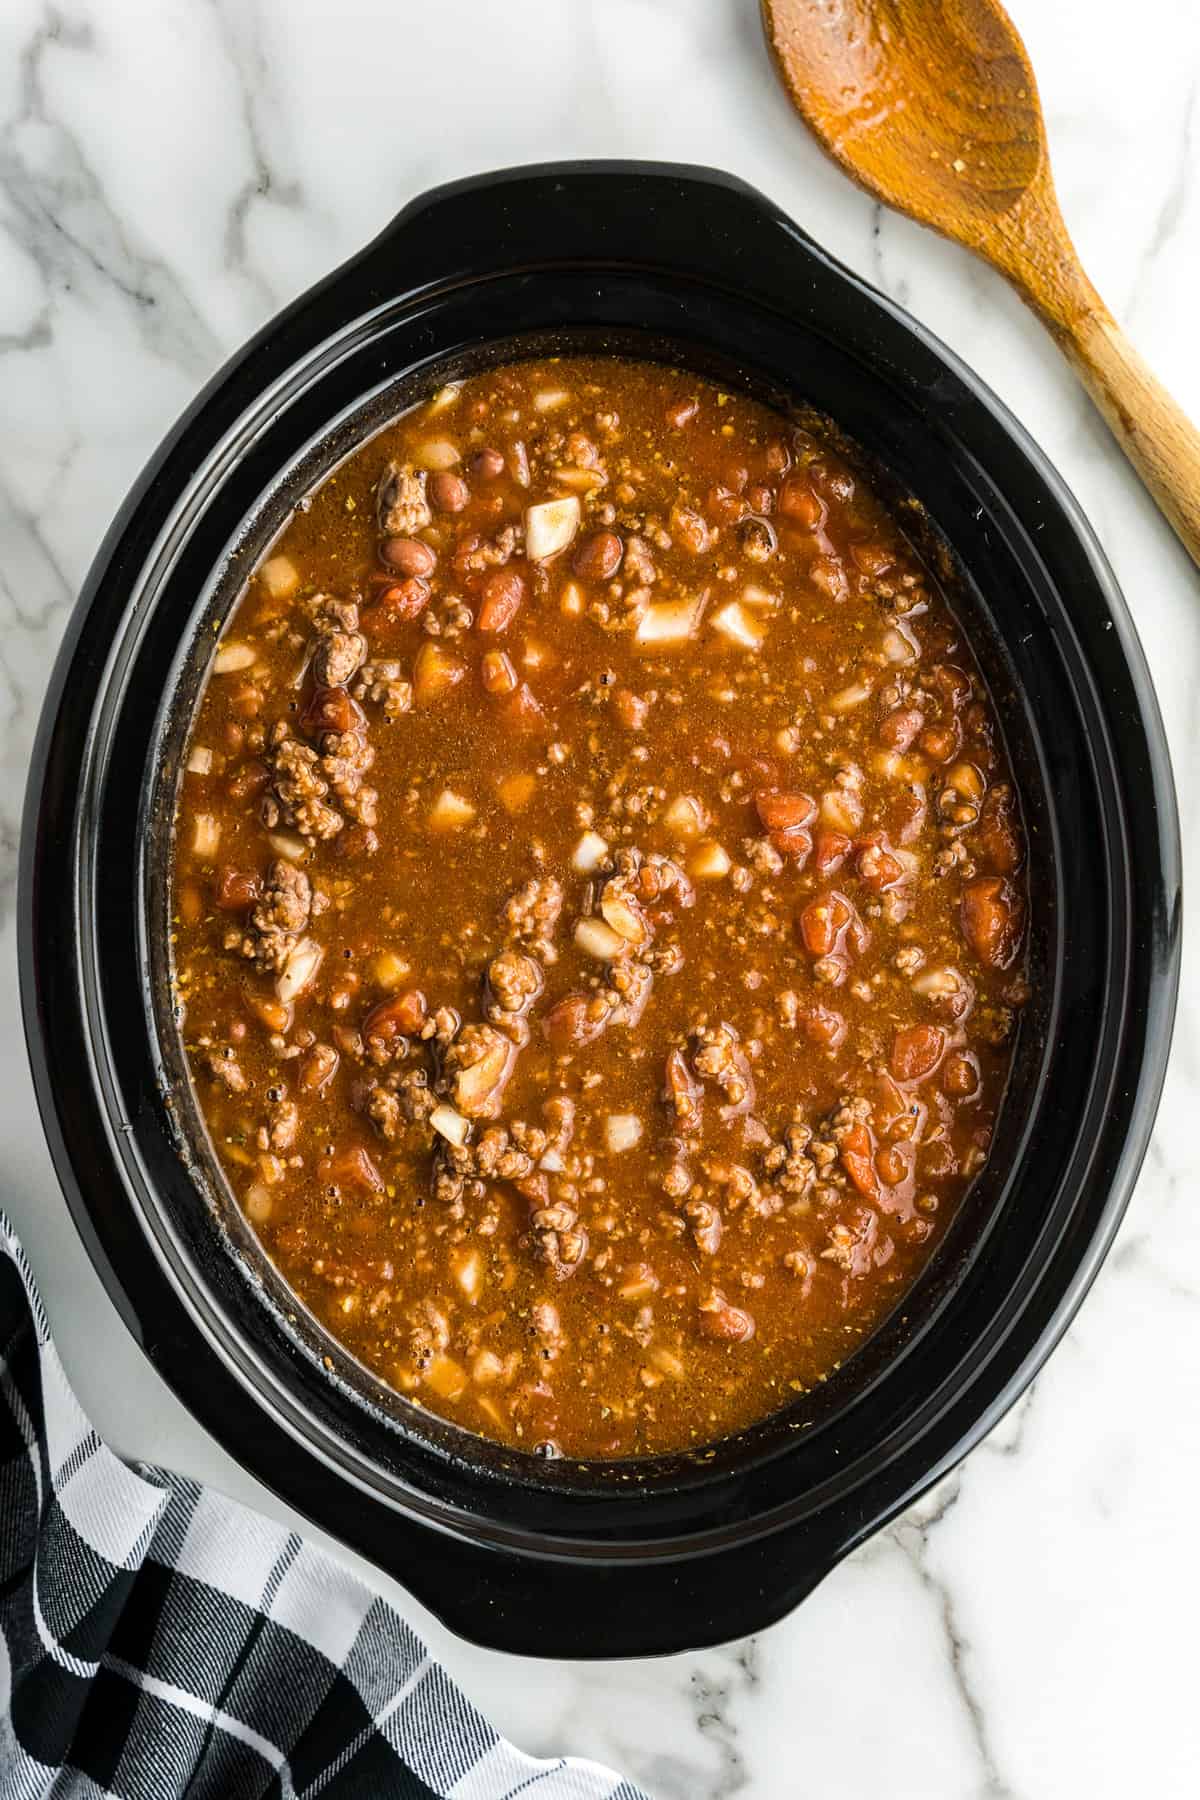 Black crock pot with chili before cooking